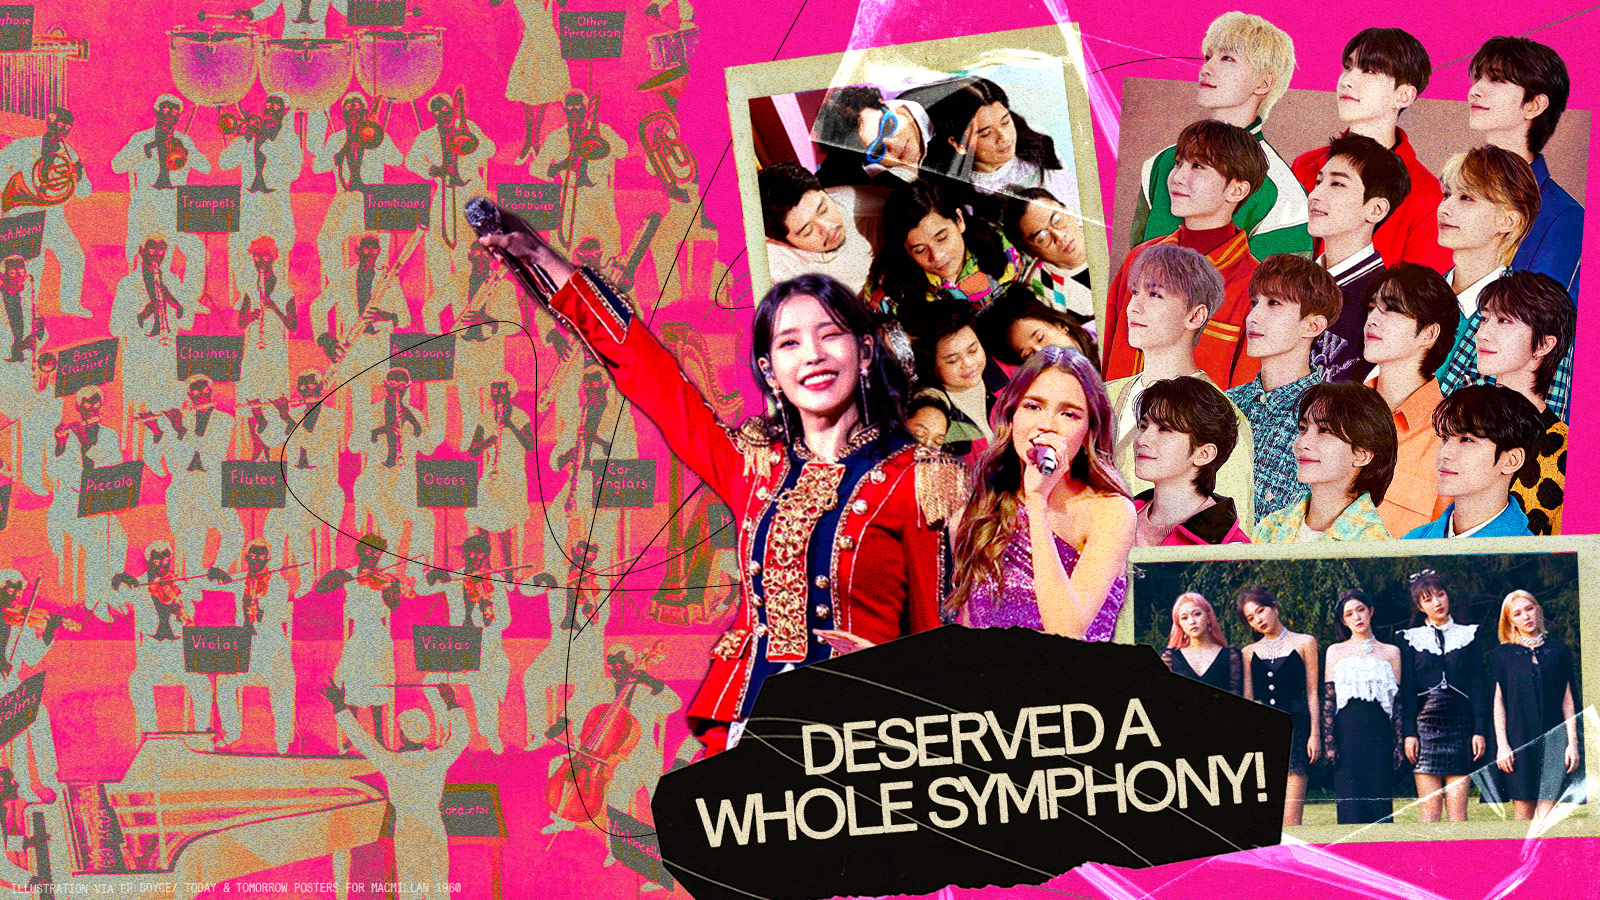 7 Artists We’d Love To See Have An Orchestra-Accompanied Concert In The Philippines